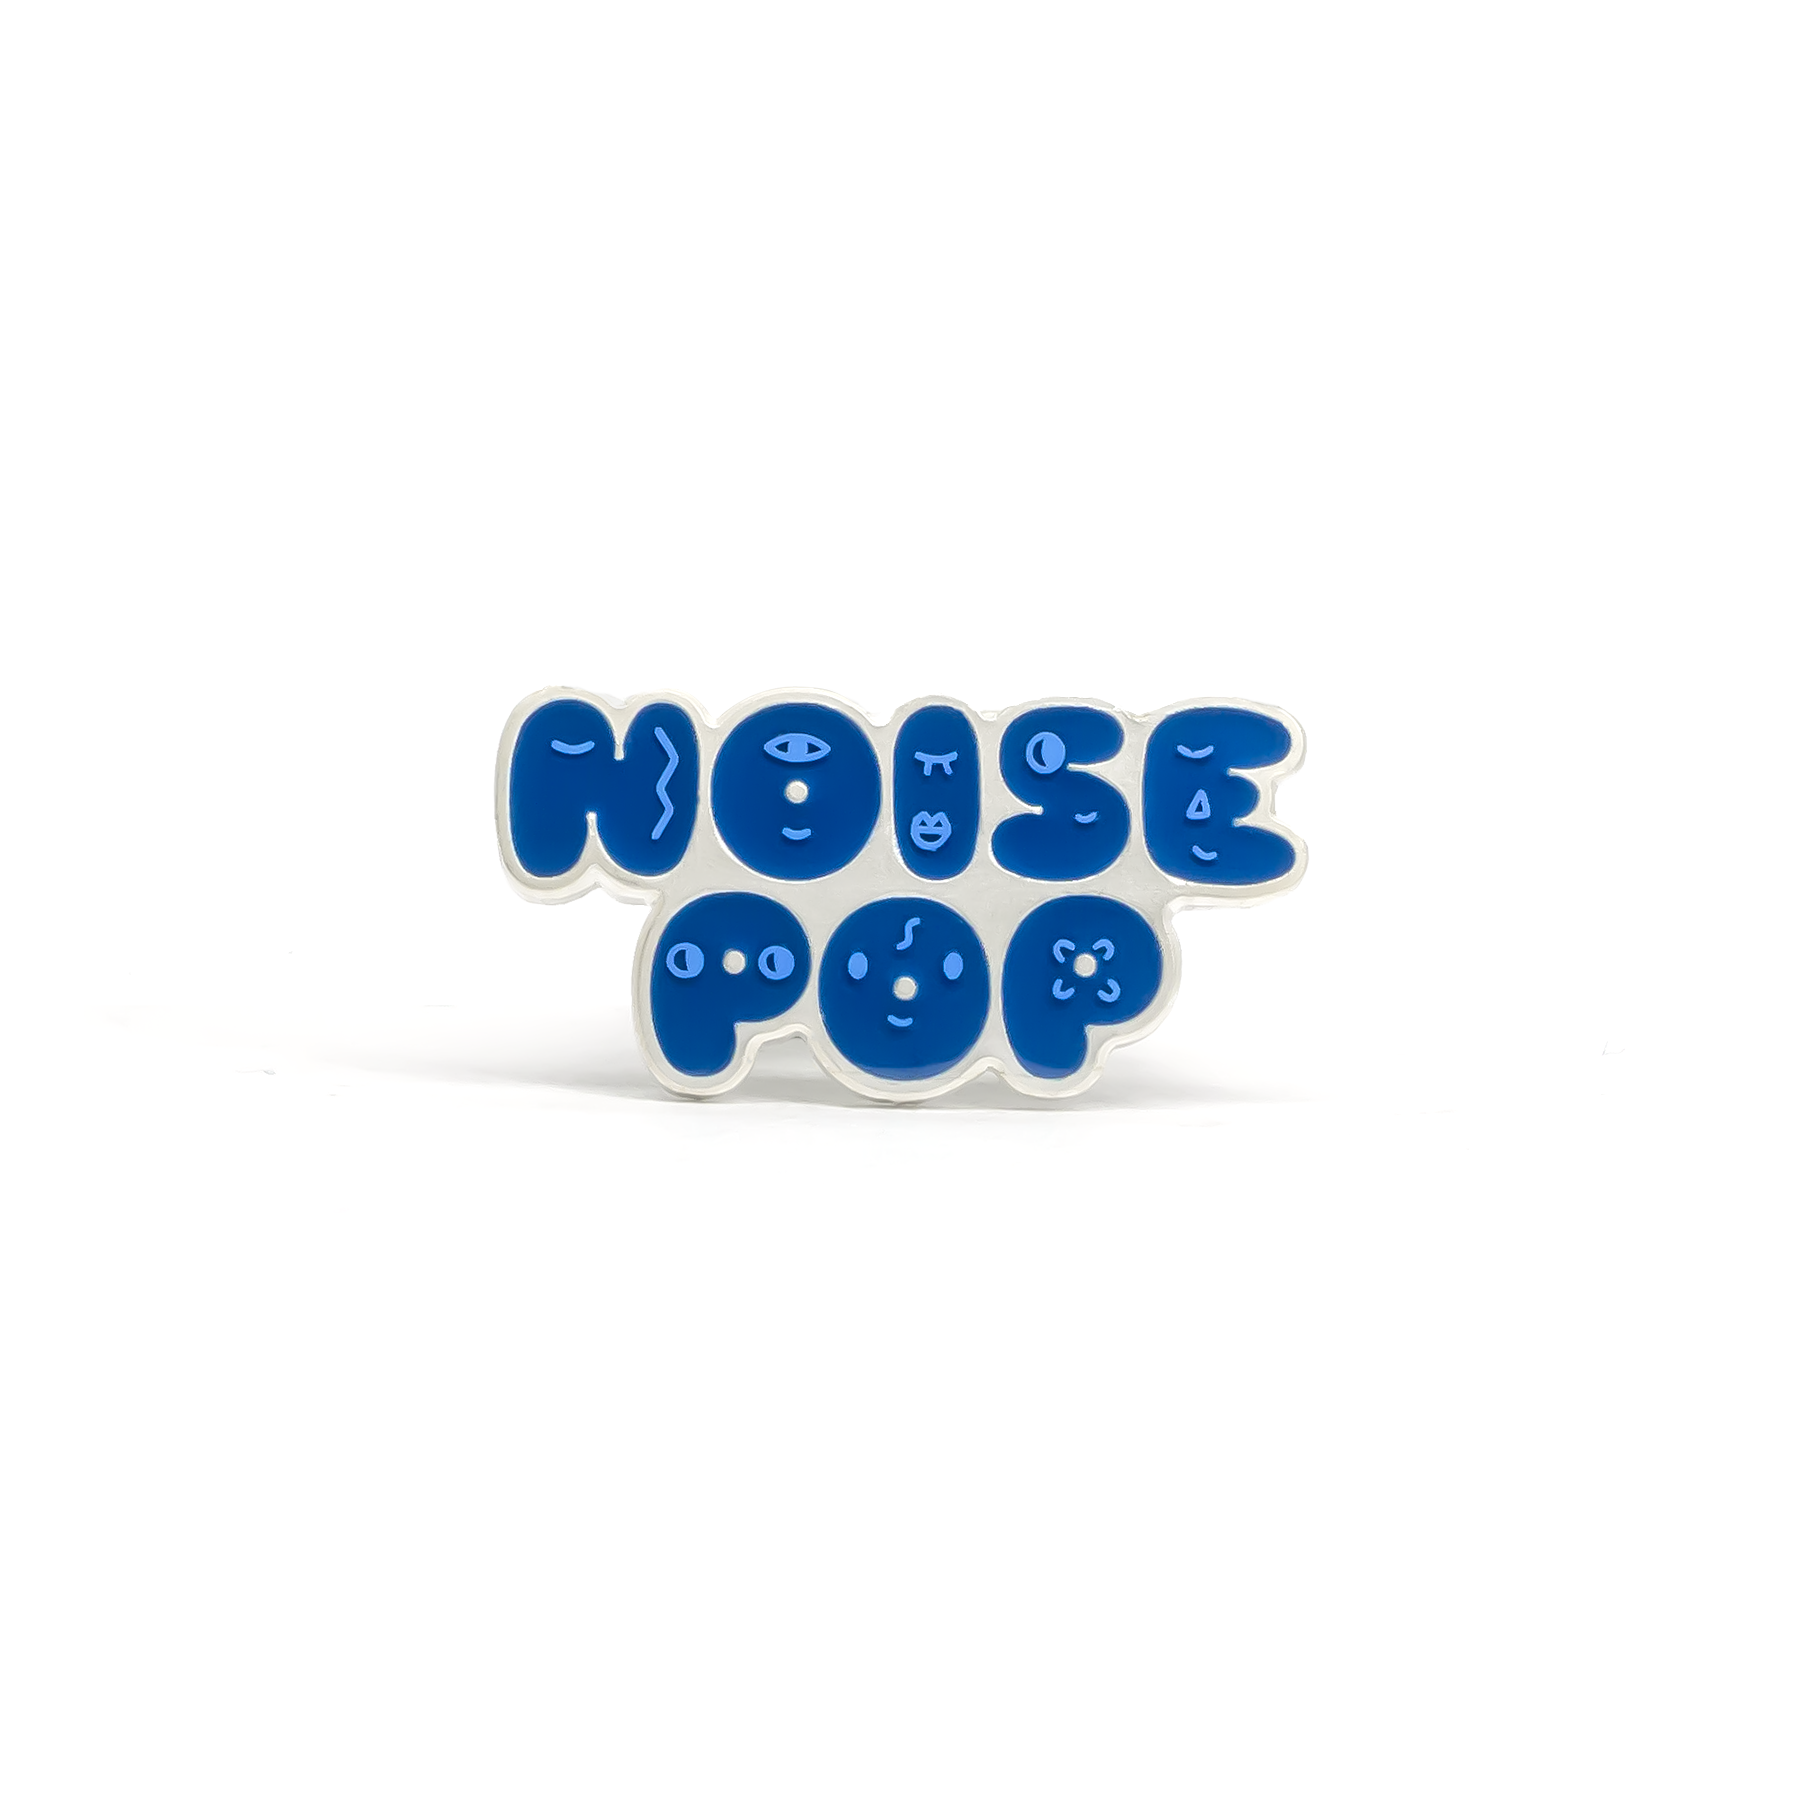 Noise Pop pin collection